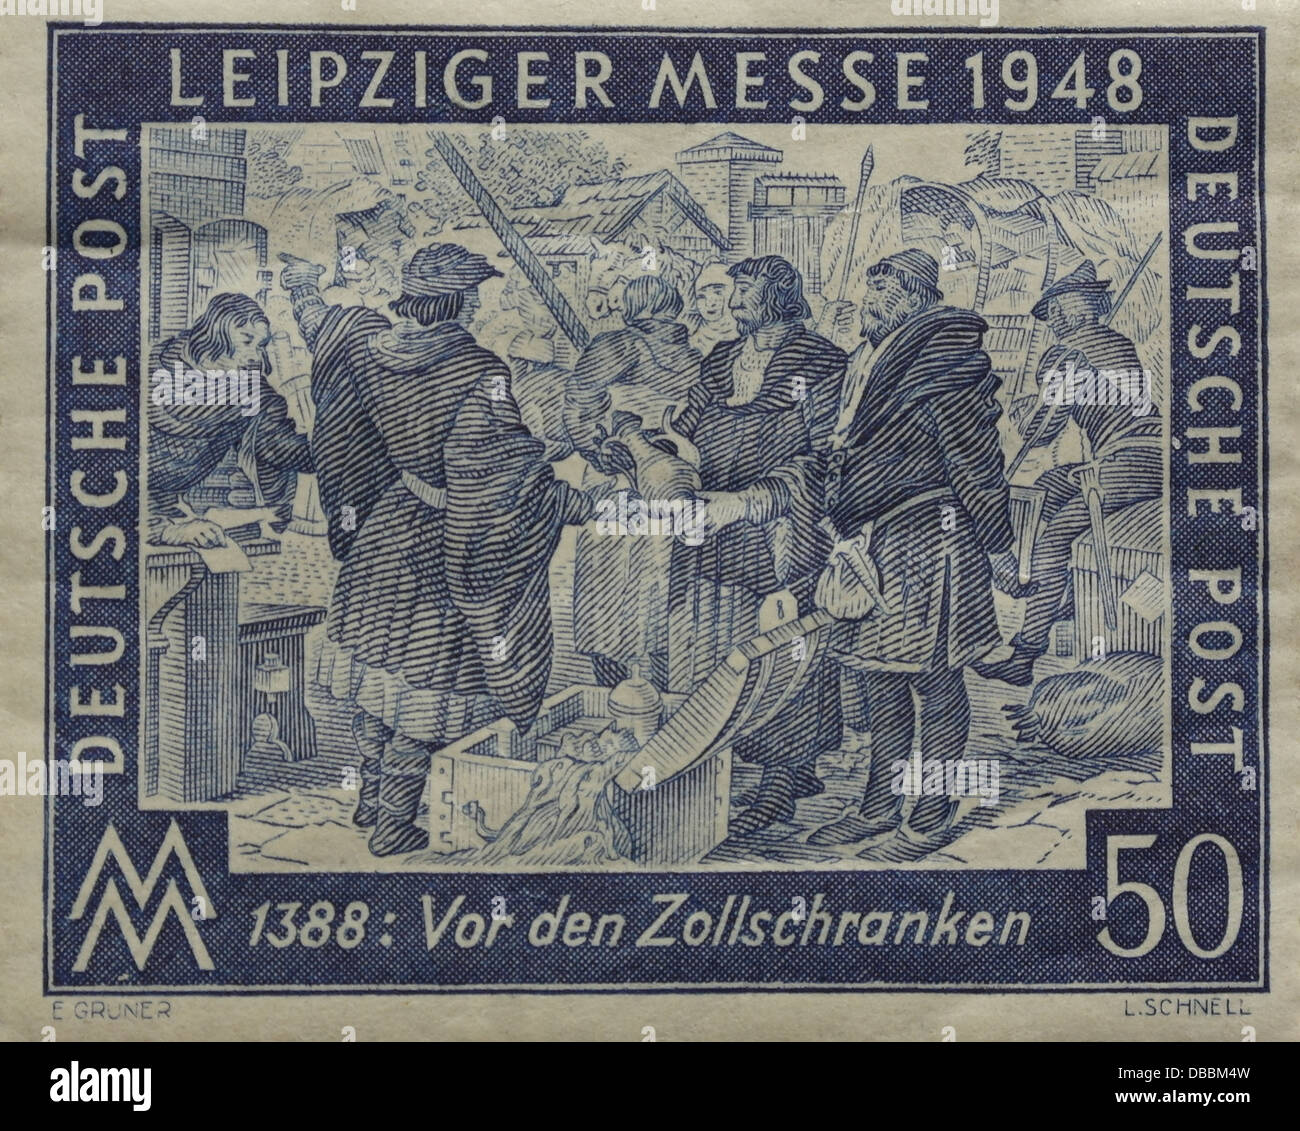 Violet 50 Pfennig postage stamp, dated 1947, showing officials collecting tariffs, Leipzig Trade Fair, Leipzig, East Germany Stock Photo